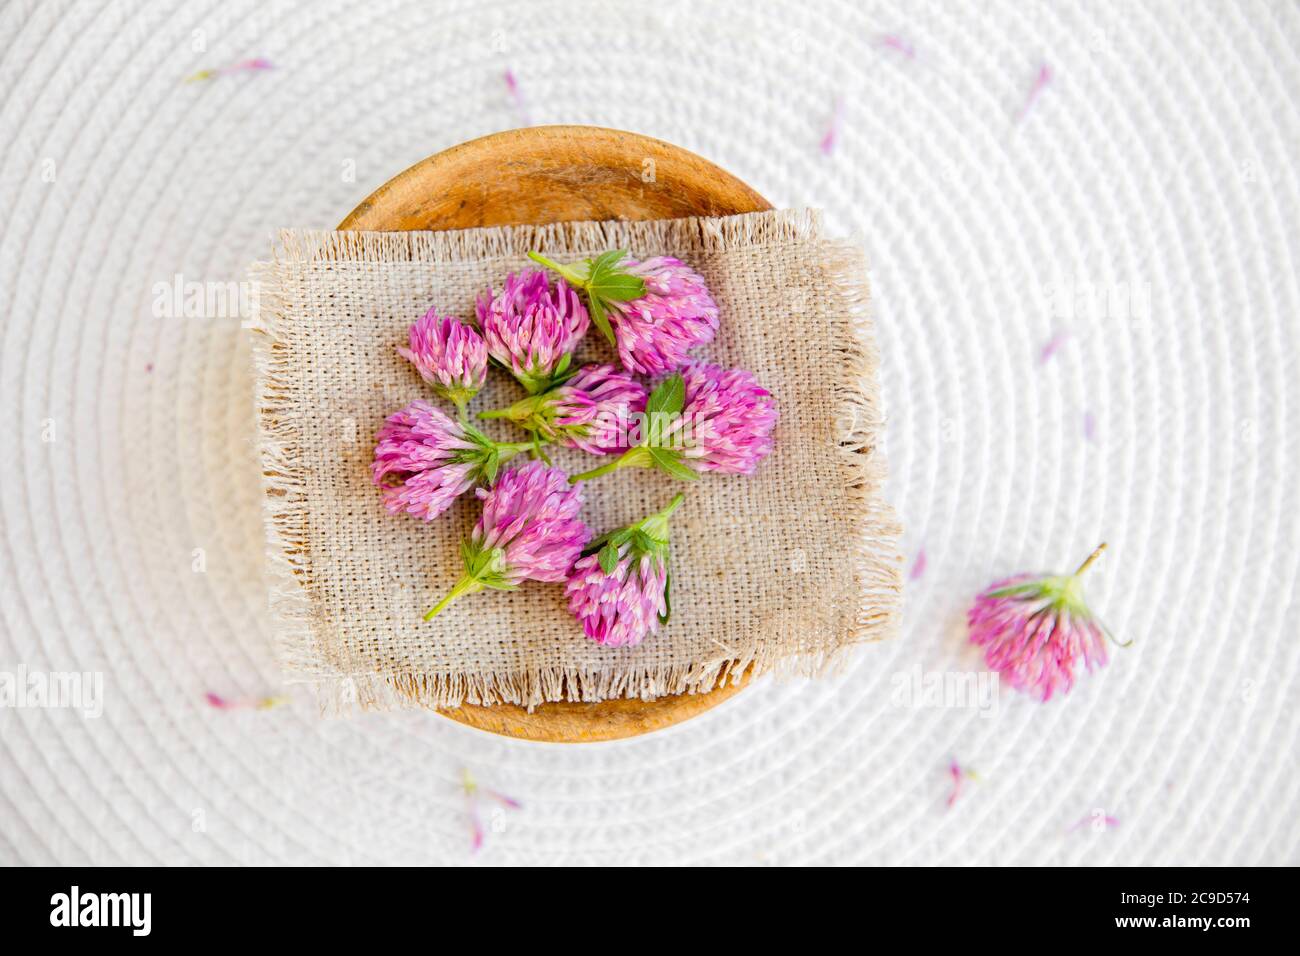 Trifolium pratense the red clover harvested flower heads on vintage cloth on white background. Stock Photo